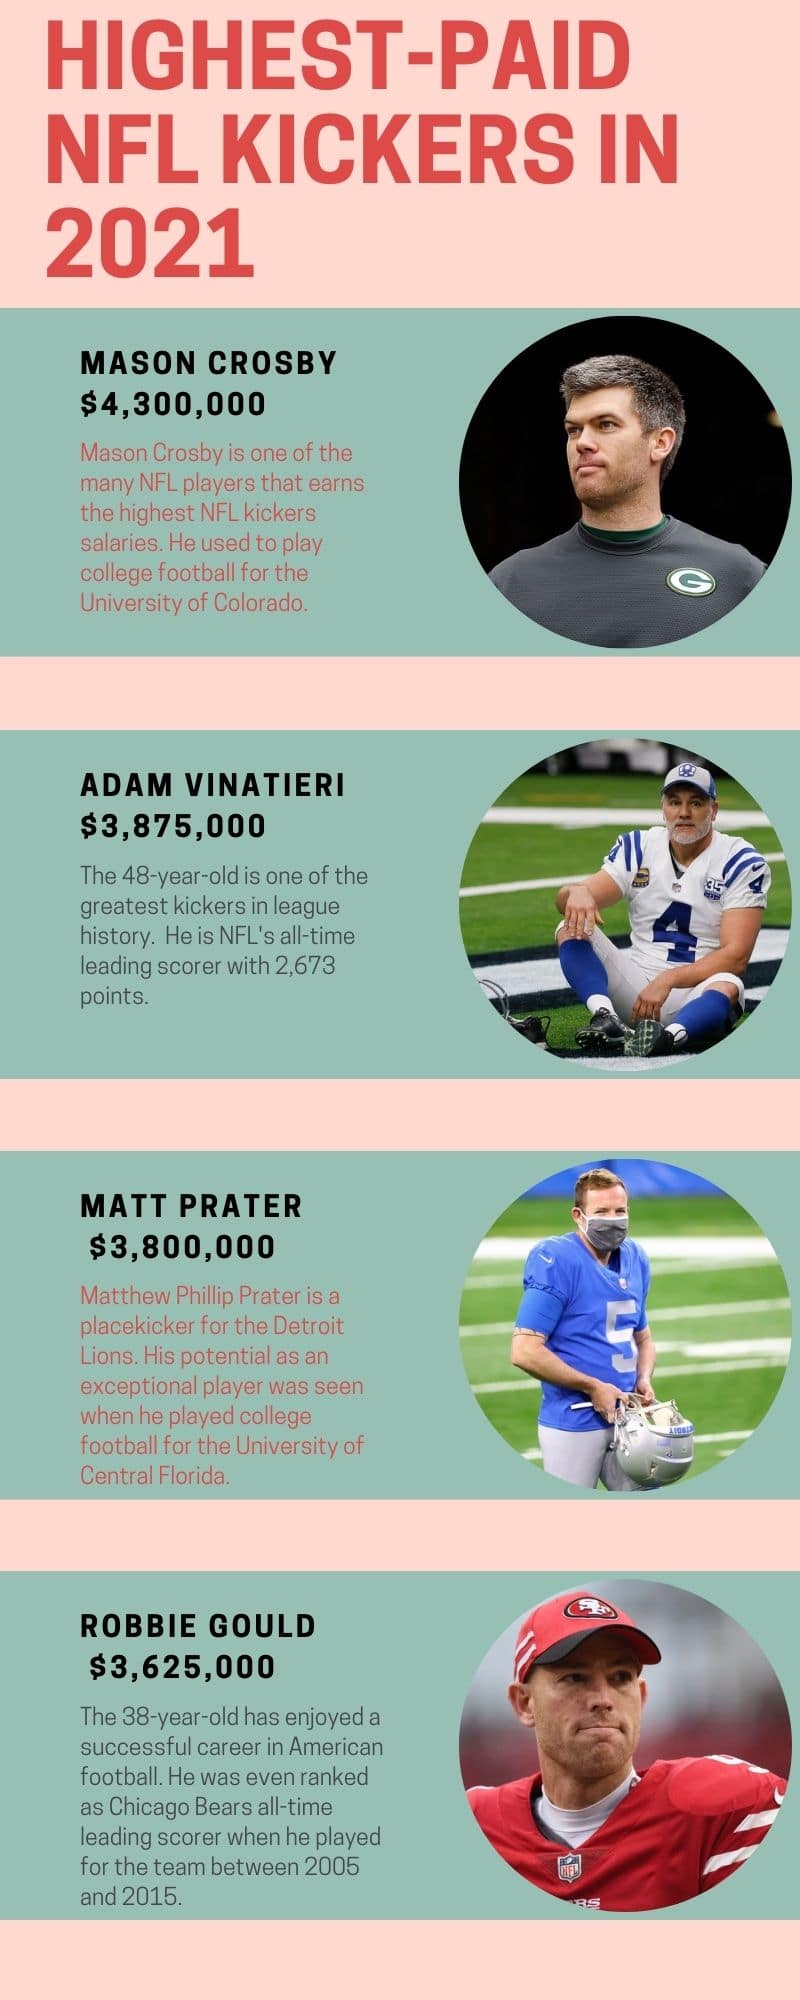 highest-paid NFL kickers in 2021